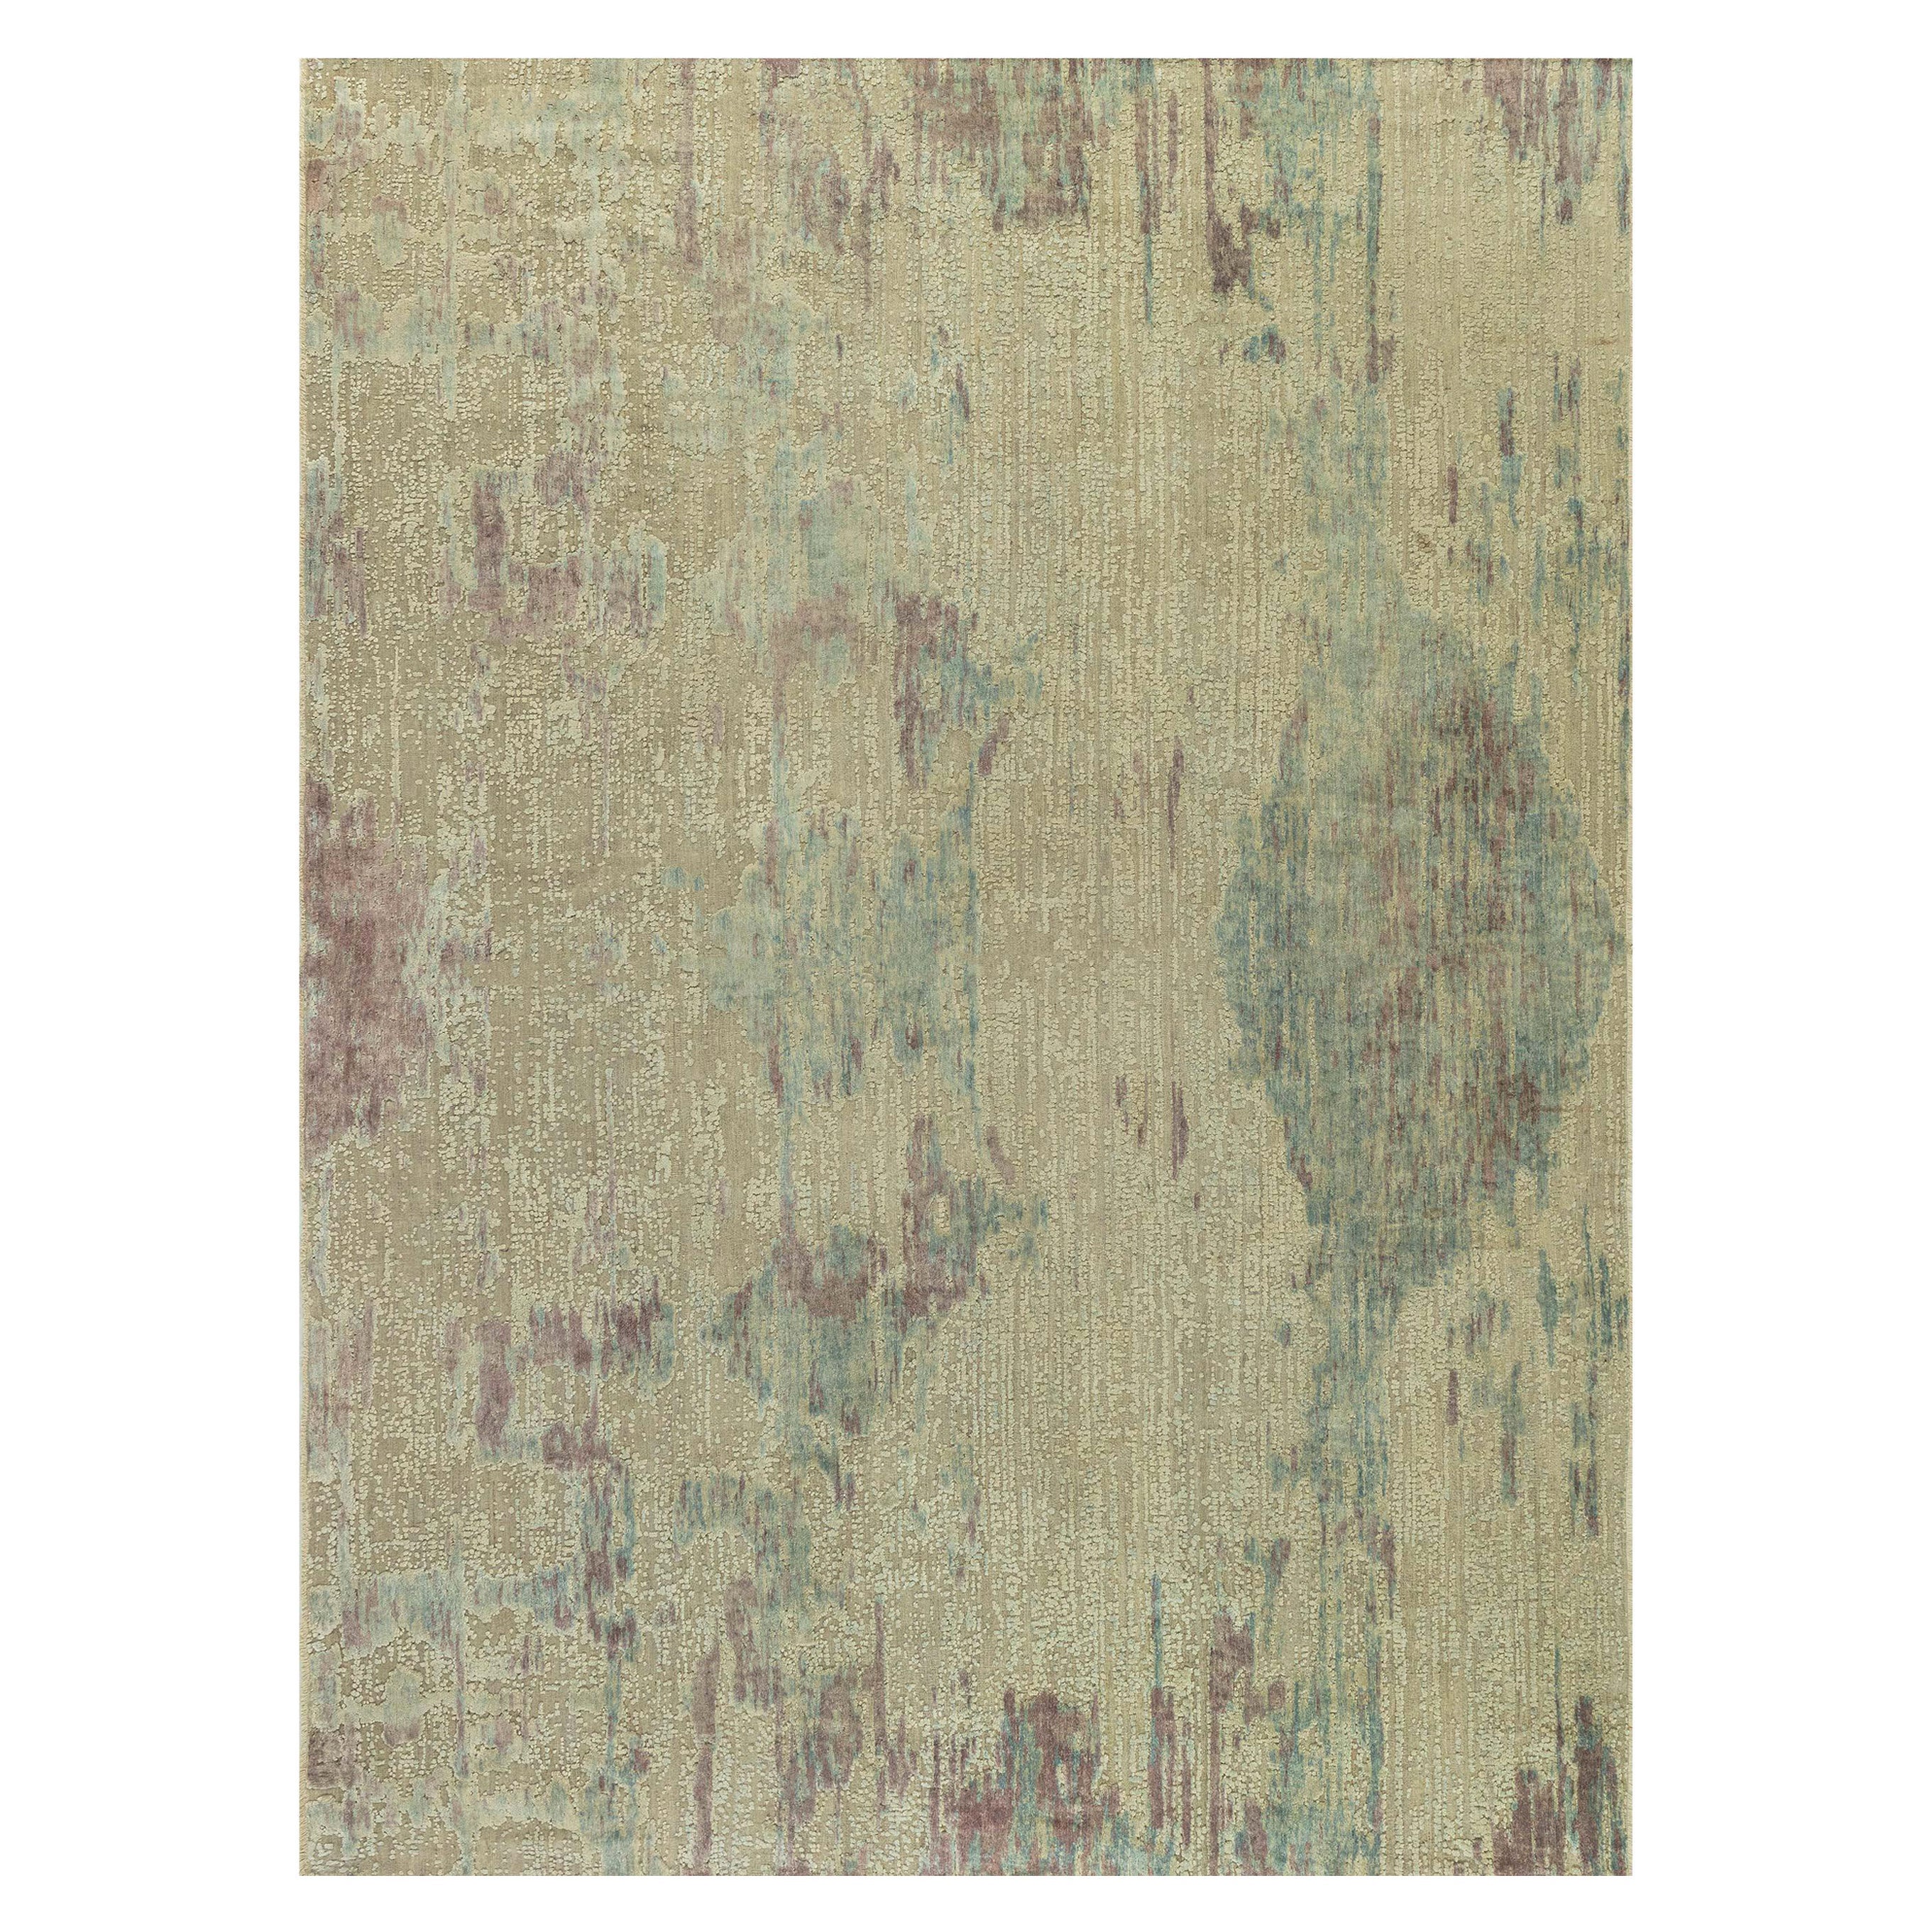 Textural Silk Rug in Faint Blues and Pinks by Doris Leslie Blau For Sale